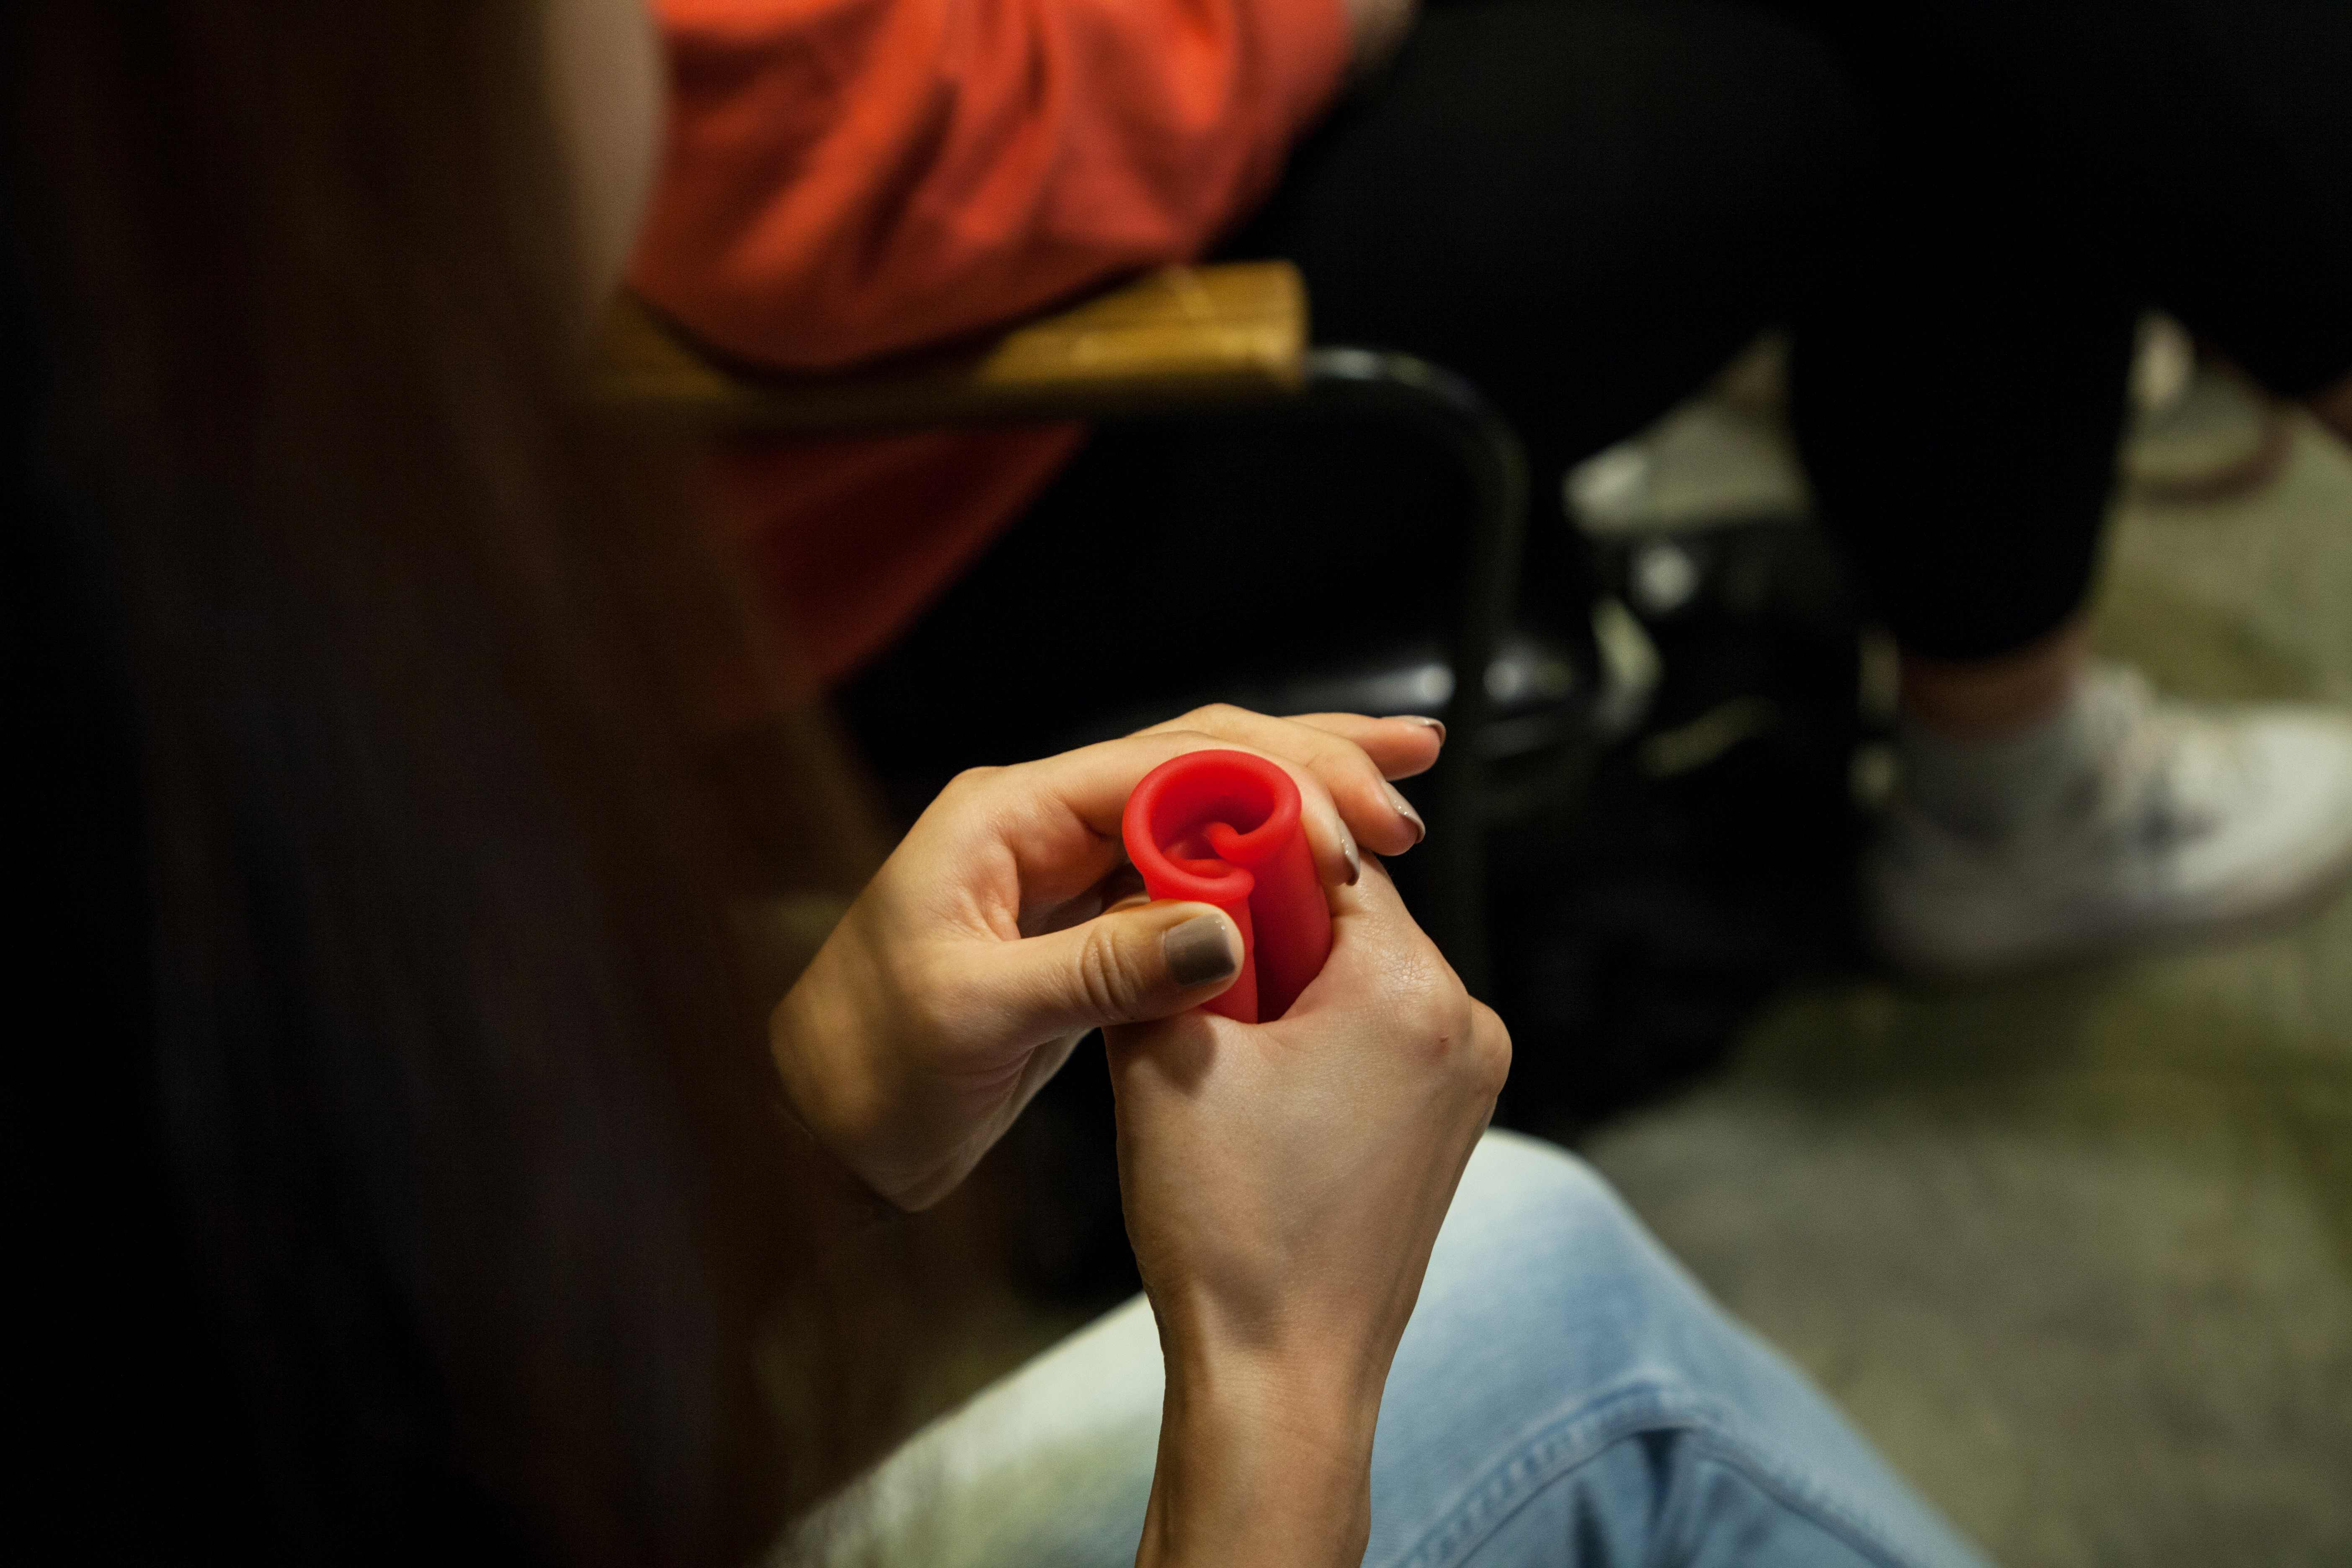 This picture taken on February 27, 2020 shows a participant practising how to fold a menstrual cup at a workshop held by LUUNA Naturals Olivia Cotes-James in Hong Kong. - No more euphemisms, no more opaque marketing, no more superstitions, and no glossing over cramps, bleeding, or pain: Reframing current attitudes is vital for female empowerment and health, as well as the environment, says the 29-year-old founder of LUÜNA Naturals, which hails itself as Asia's first period care company with an all-female leadership team. (Photo by Veronica SANCHIS BENCOMO / AFP) / TO GO WITH Women-activism-economy-HongKong-environment-health,INTERVIEW by Liz THOMAS